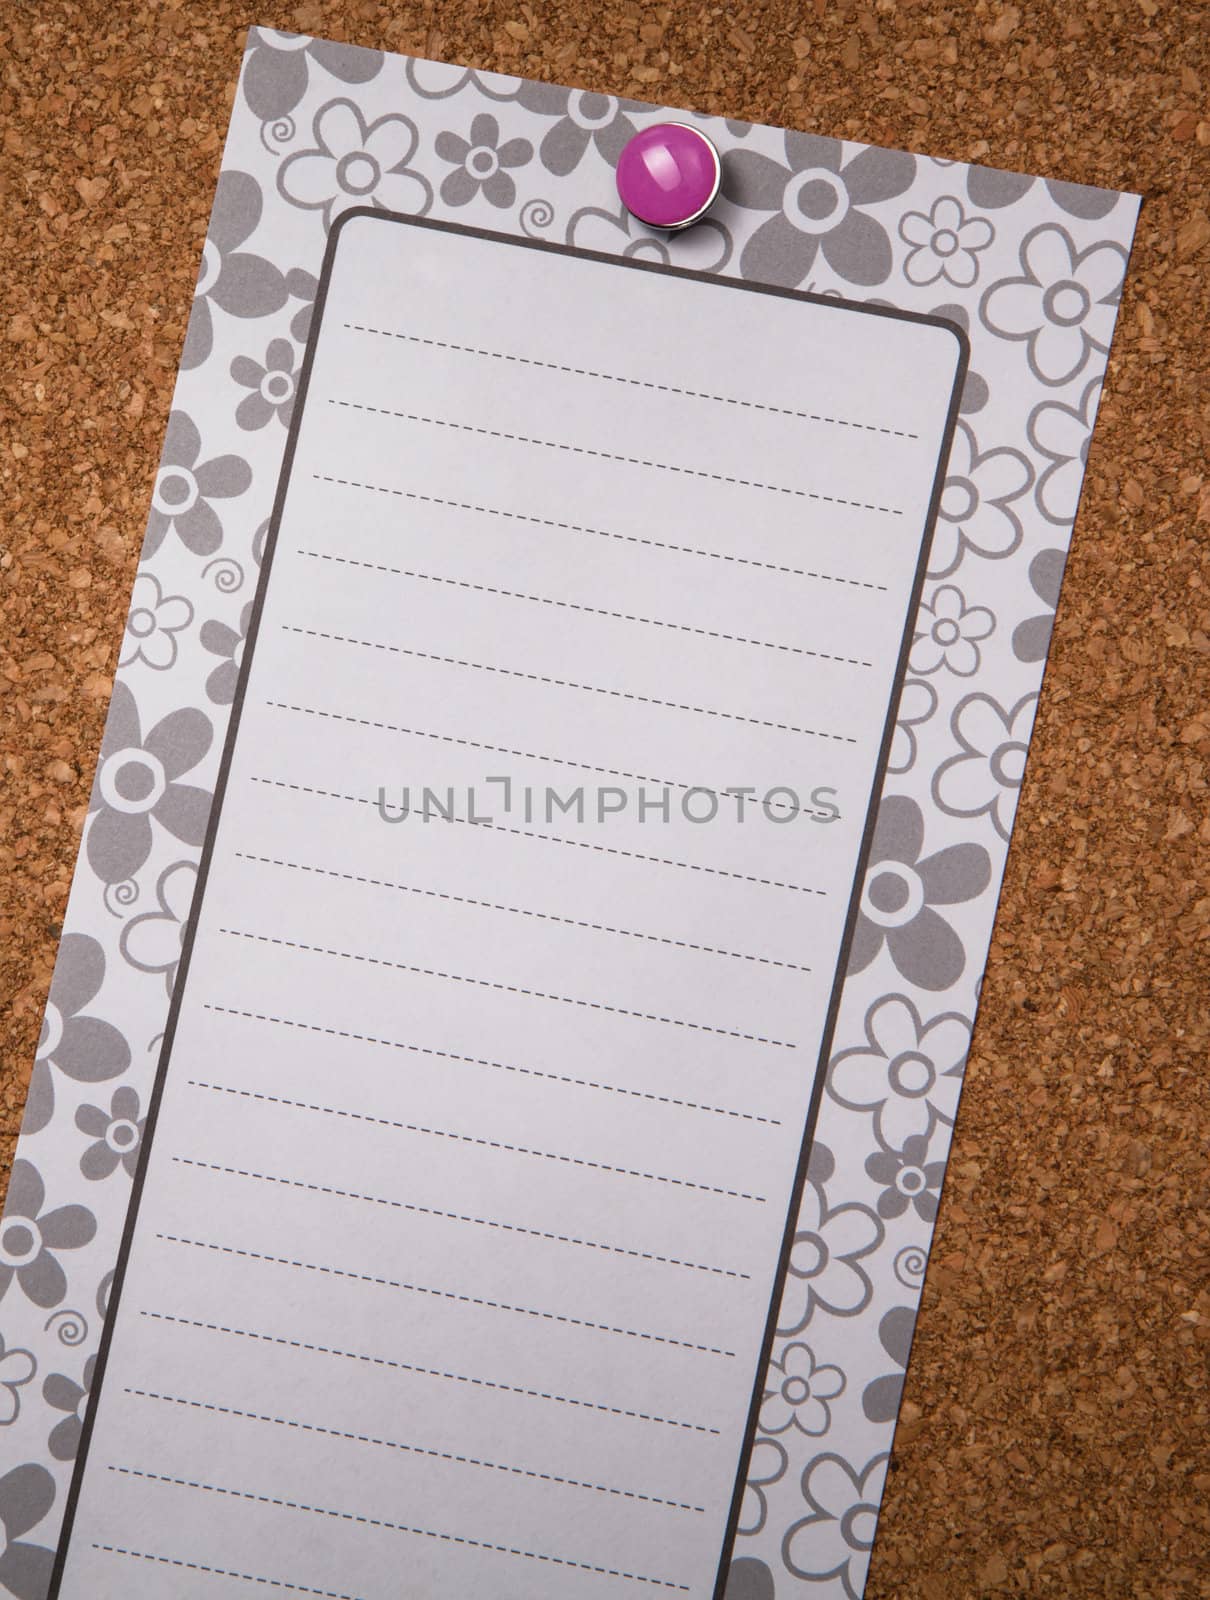 White lined note pad